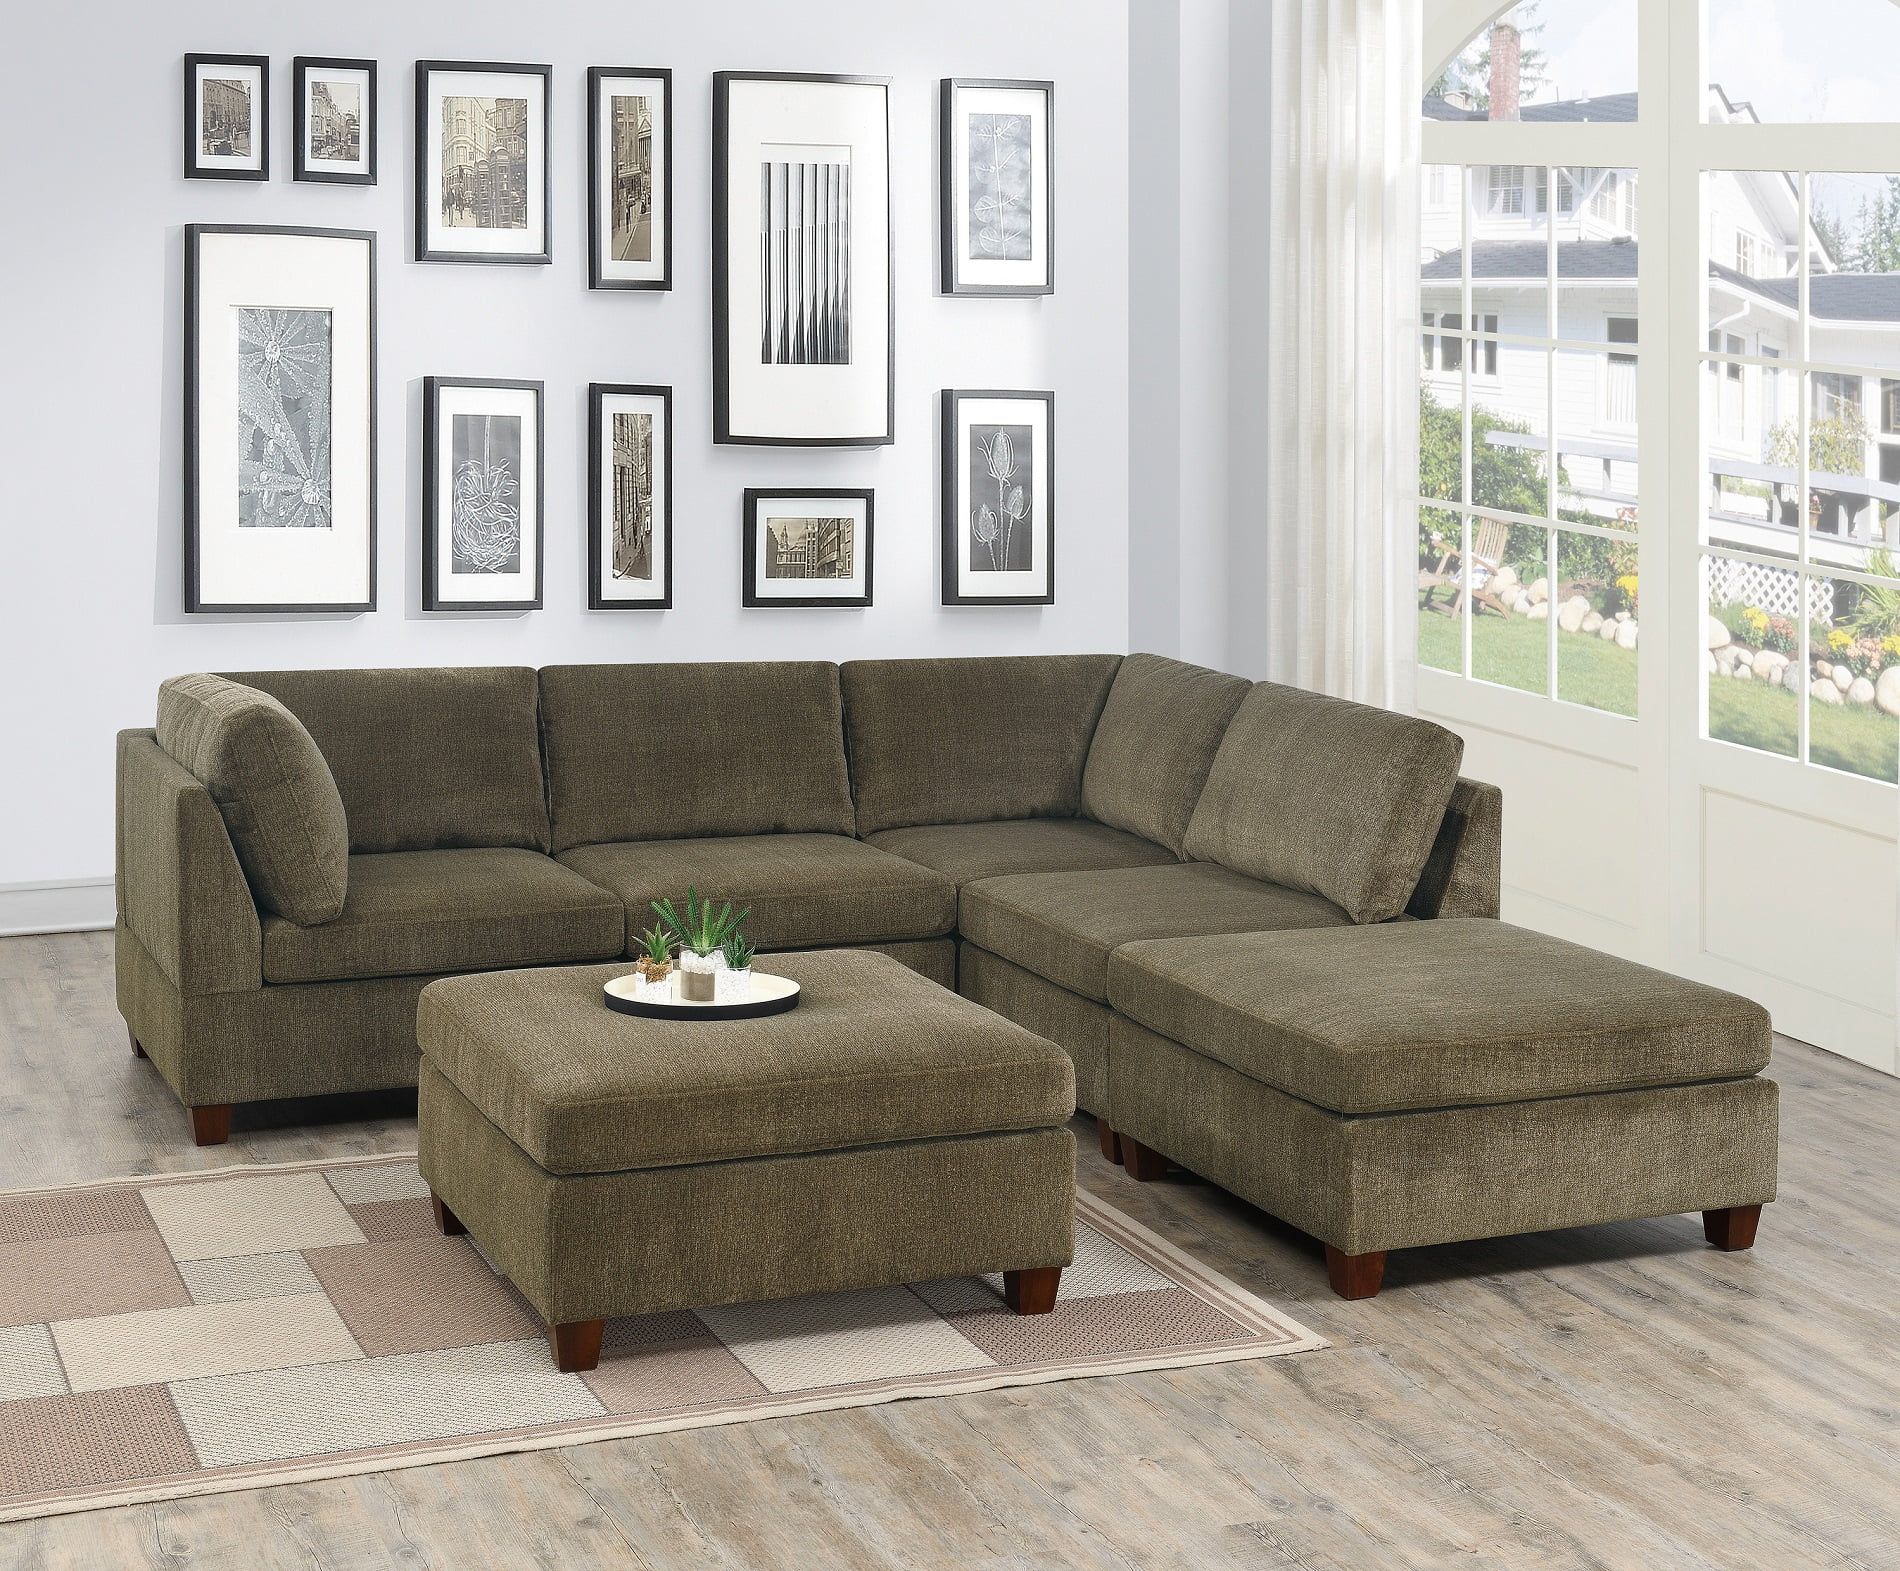 Contemporary Modern Unique Modular 6pc Sectional Sofa Set Tan Color Inside Chenille Sectional Sofas (Gallery 6 of 20)